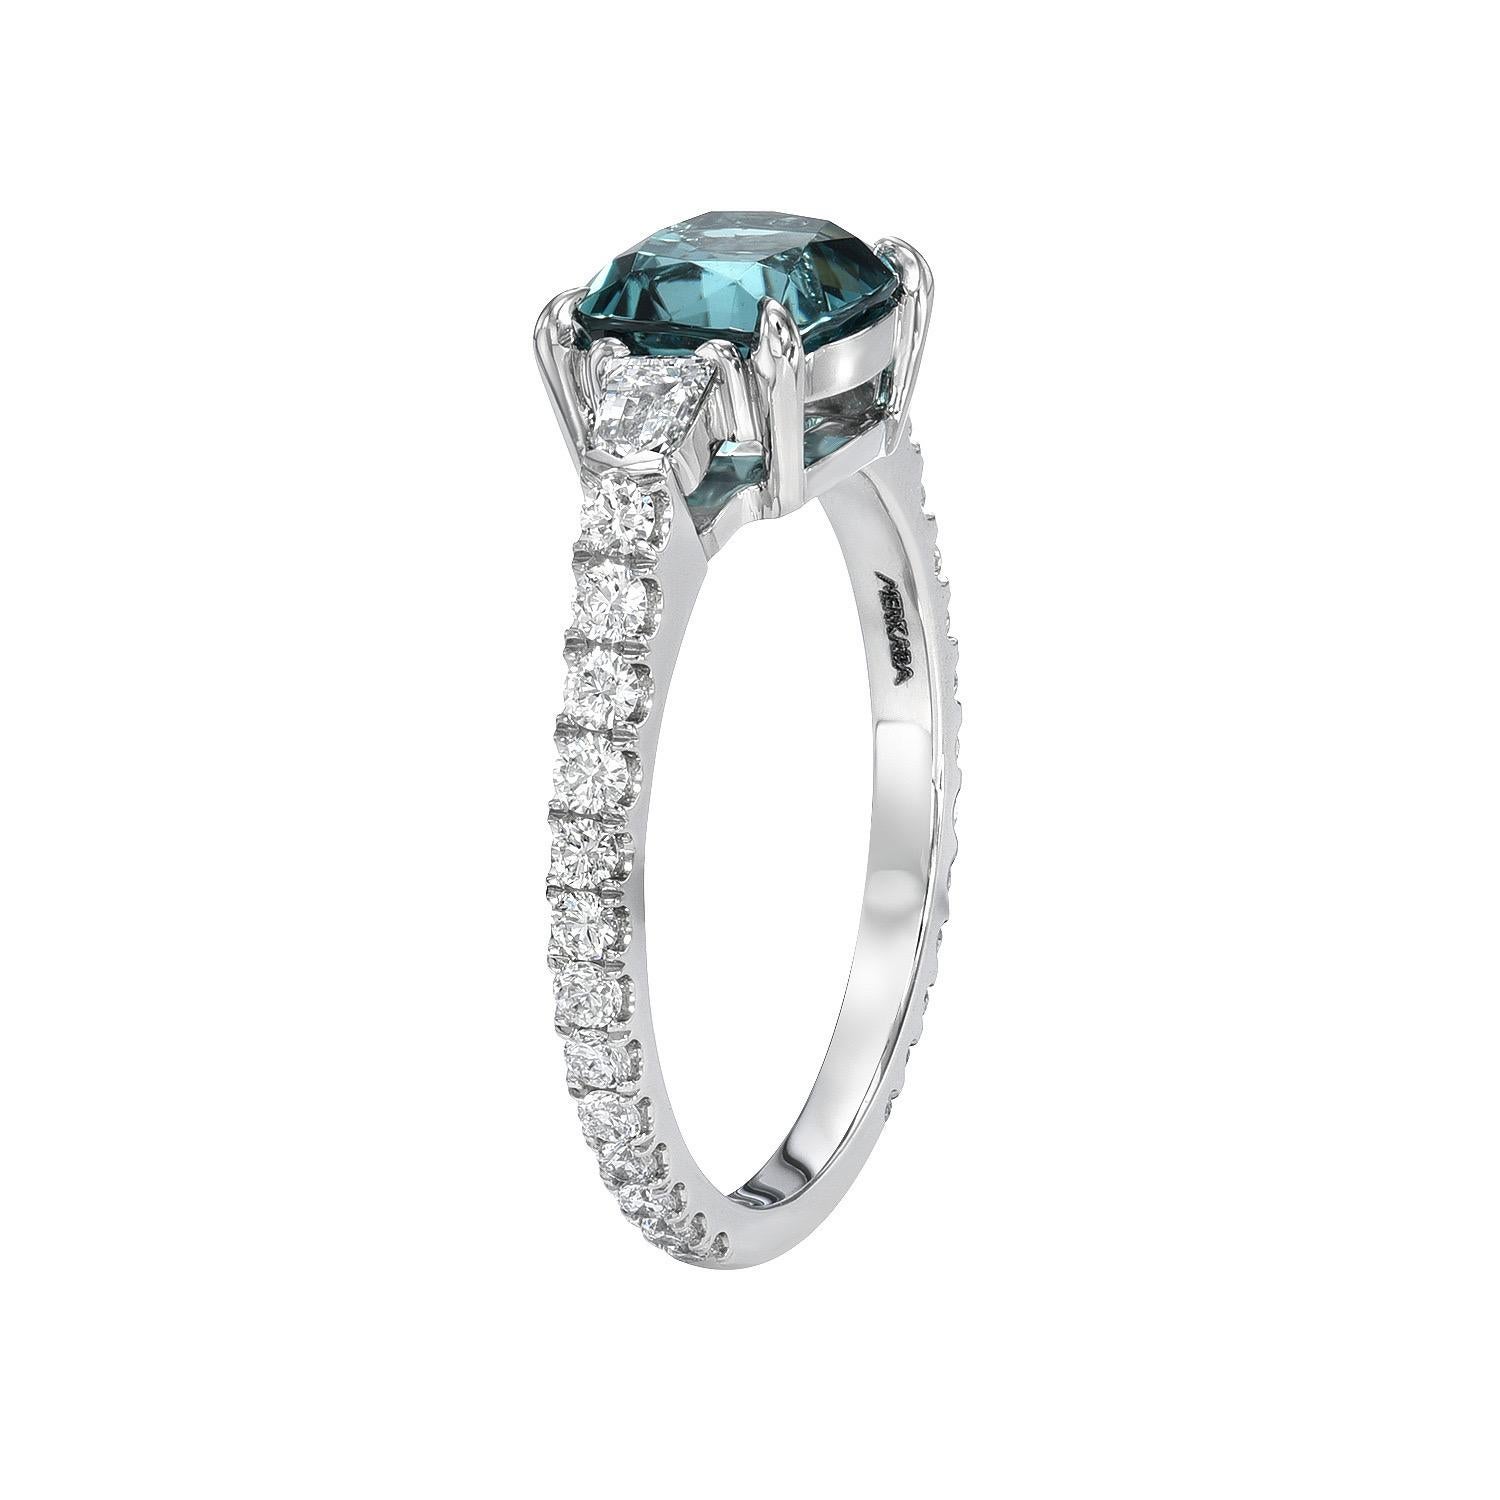 Superb 1.63 carat lagoon-blue Tourmaline cushion platinum ring, flanked by a pair of 0.21 carat D/VS1 diamond bullets, and a total of 0.41 carat round brilliant collection diamonds.
Ring size 6. Resizing is complementary upon request.
Crafted by